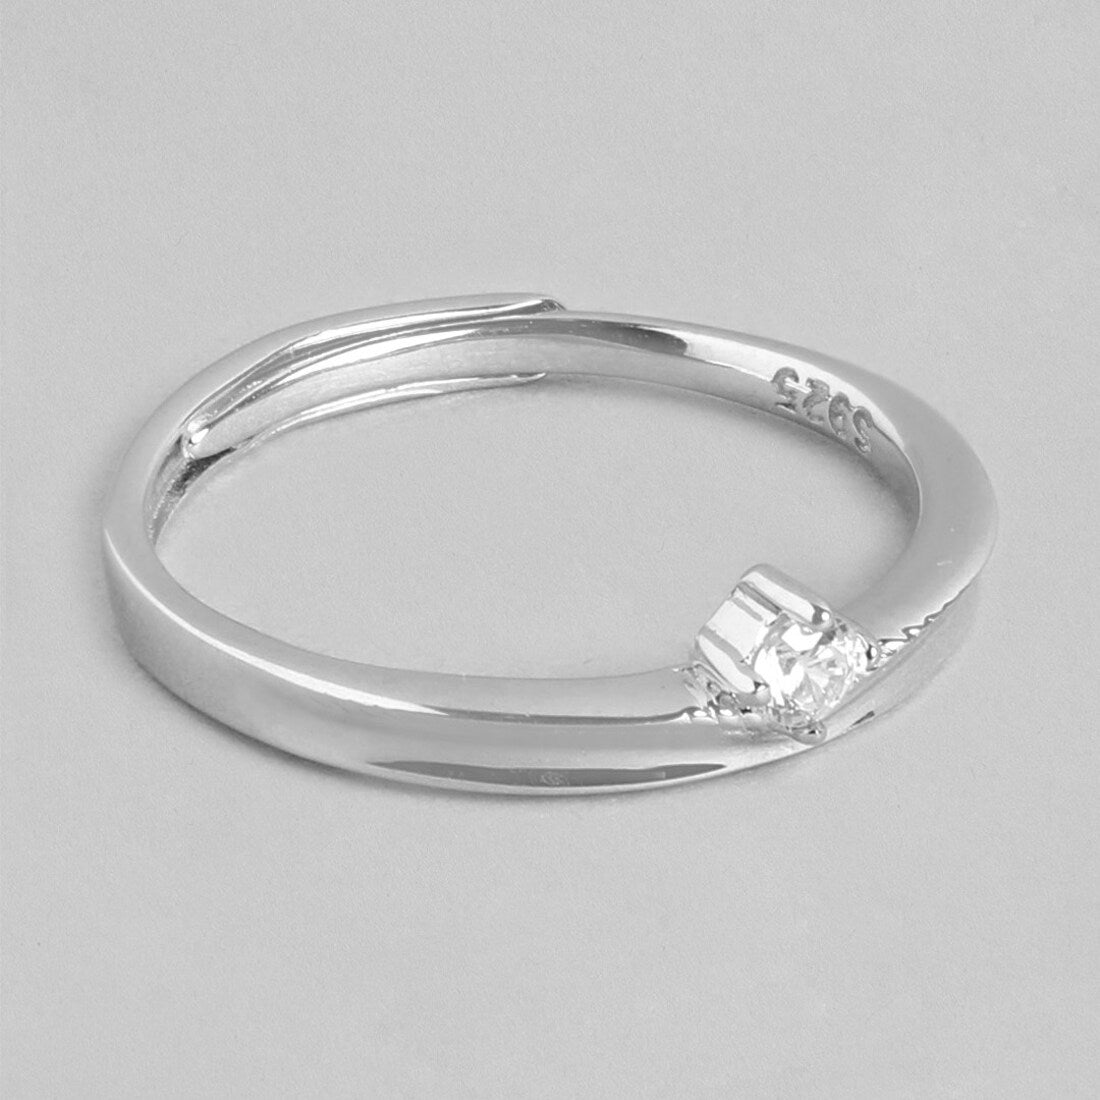 Radiant Simplicity 925 Sterling Silver Female Ring with Cubic Zirconia